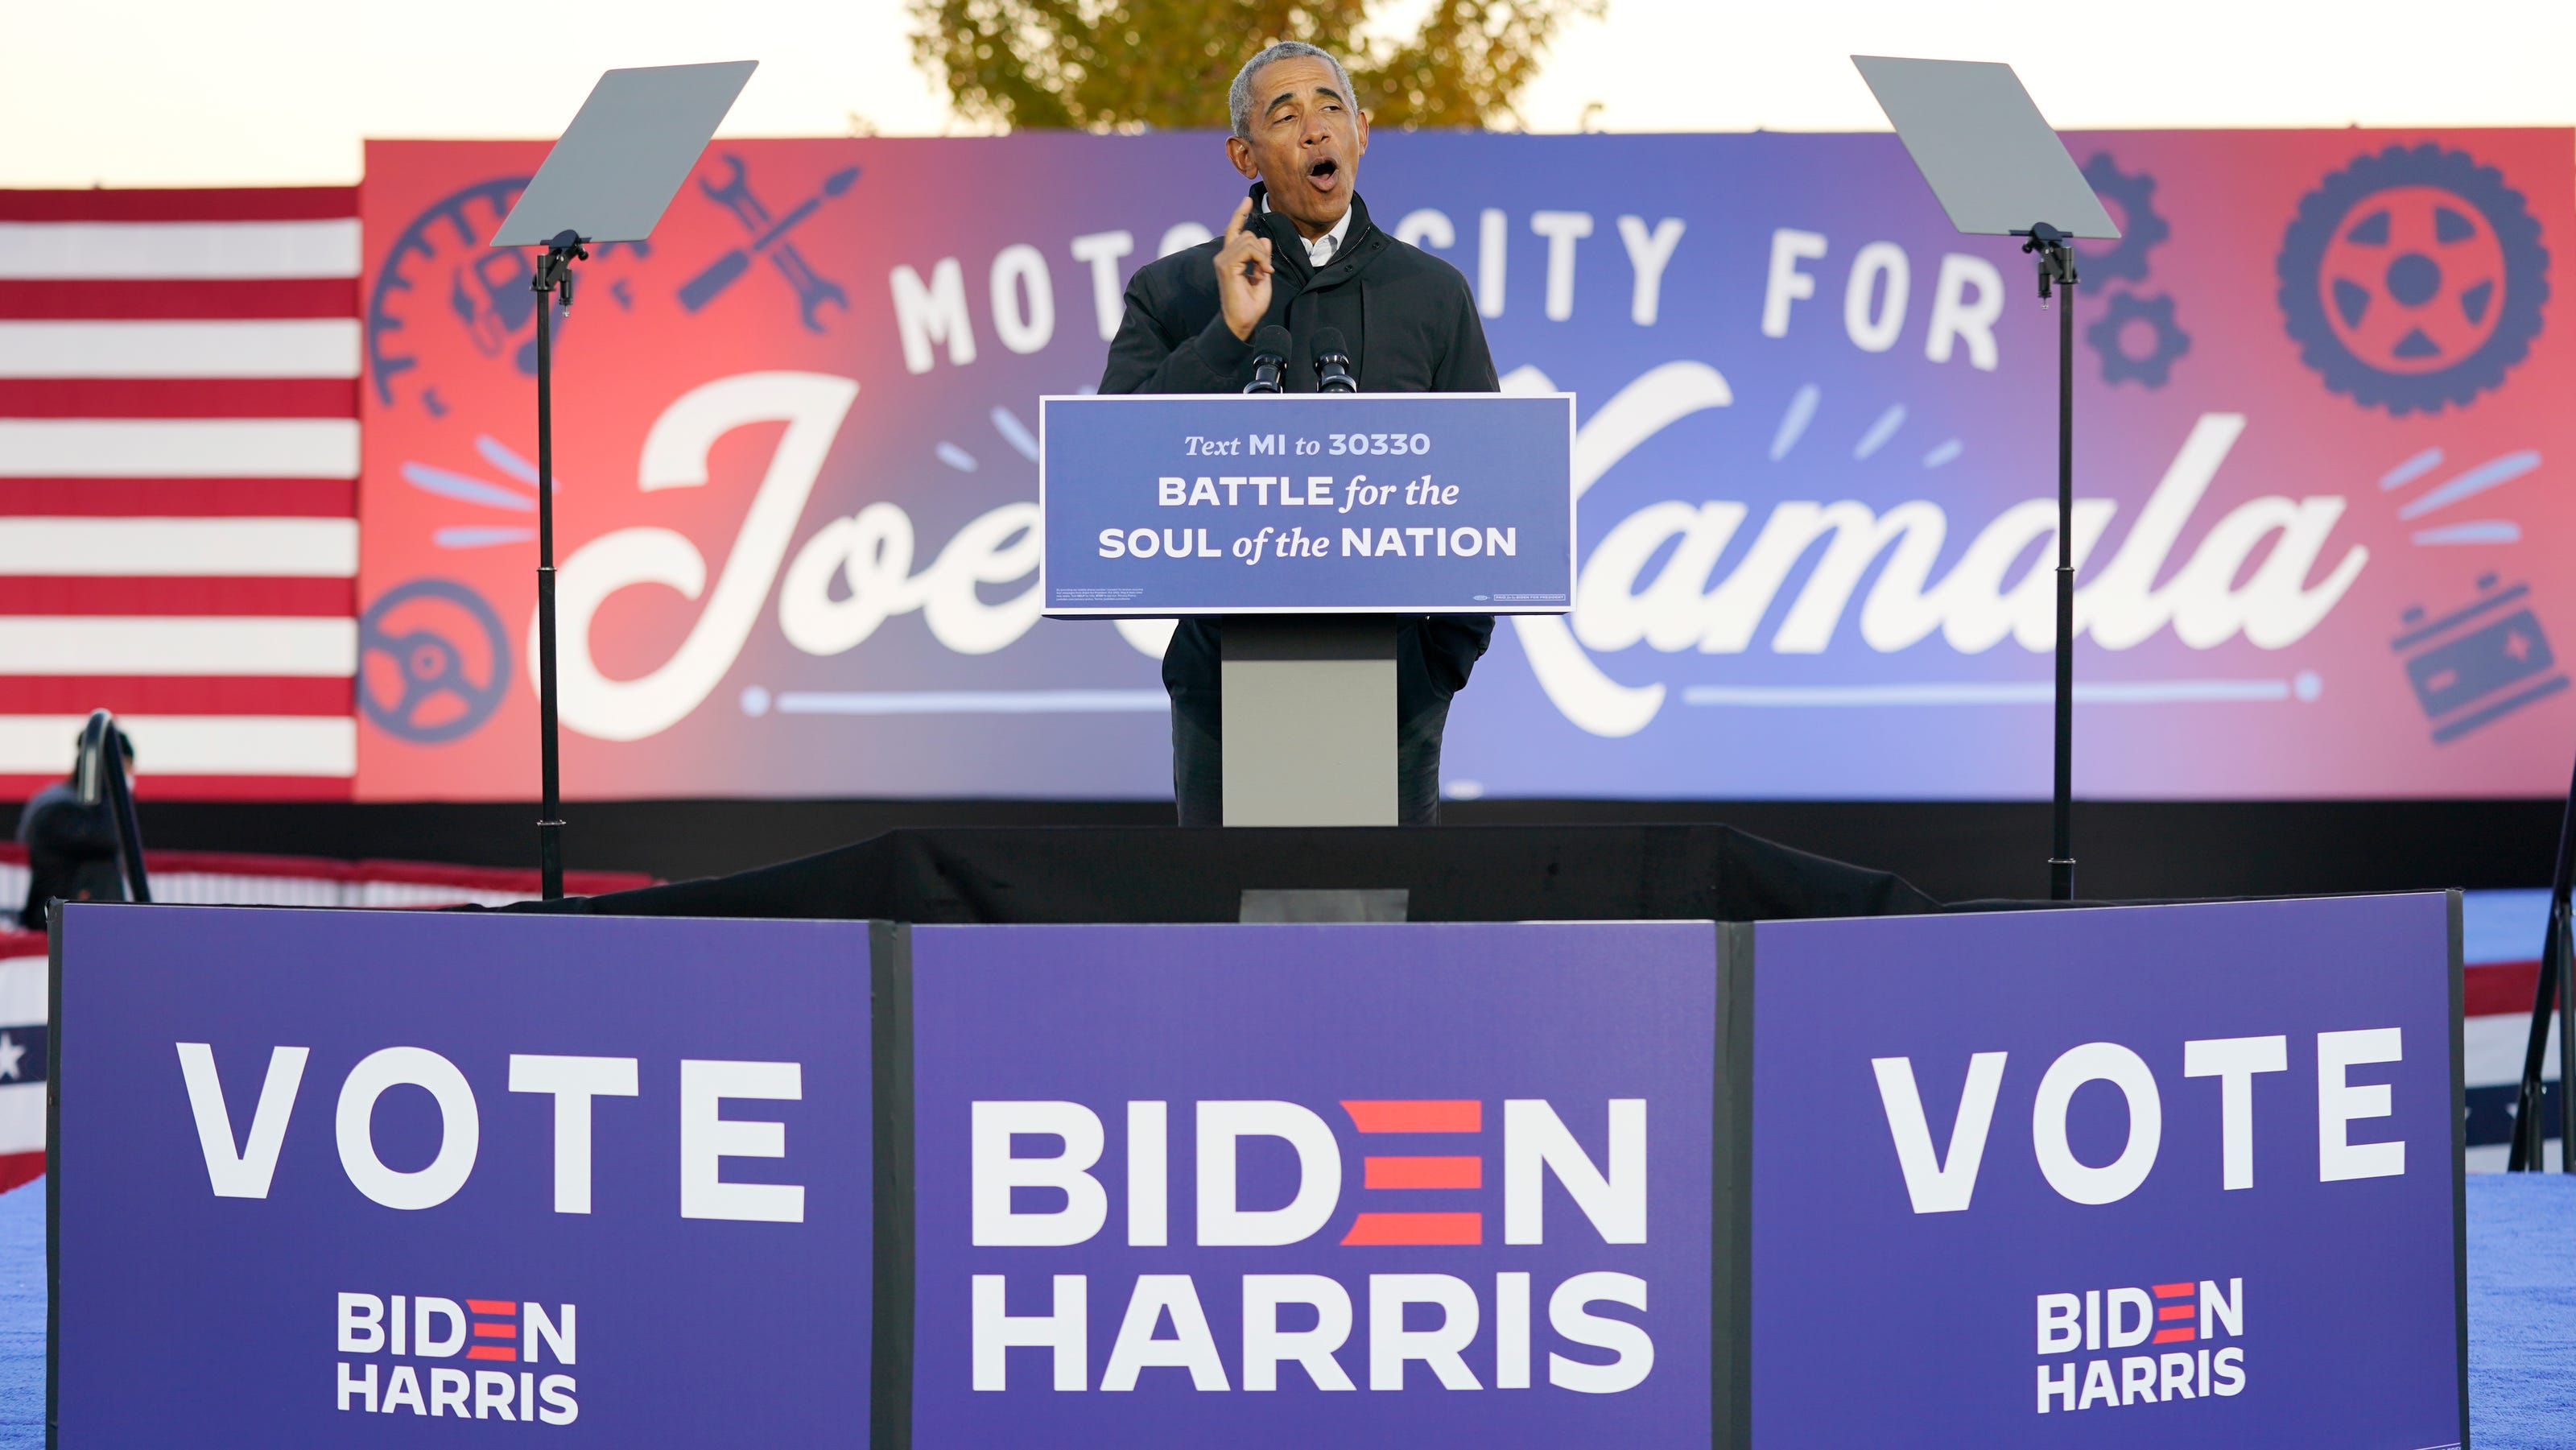 Obama and Biden in Detroit: 'Leave no doubt about who we are' - The Detroit News